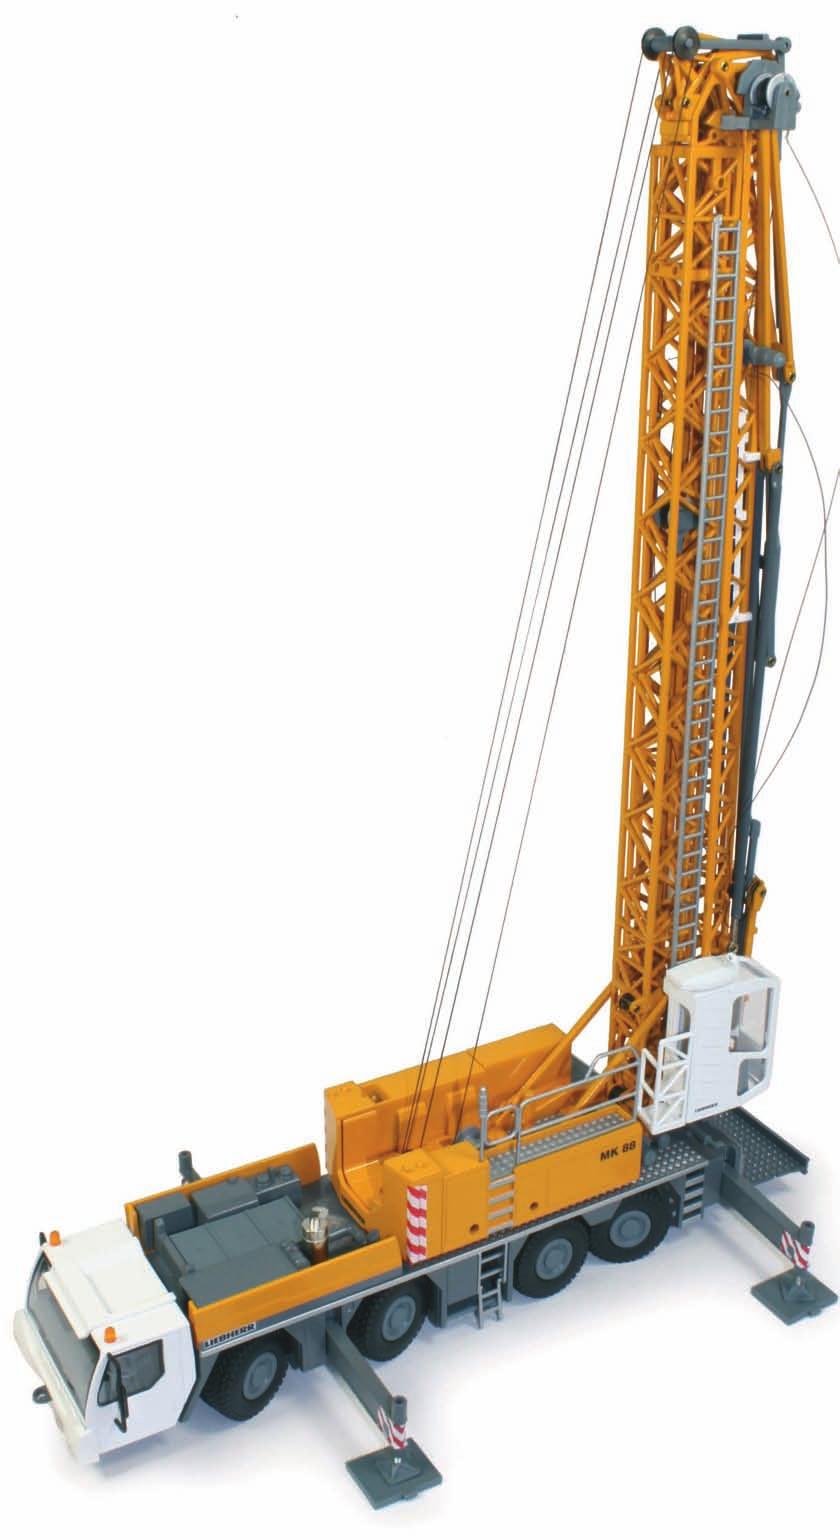 LIEBHERR PROFILE MK88 FOUR-AXLE MOBILE TOWER CRANE Liebherr produces a full range of construction cranes at its